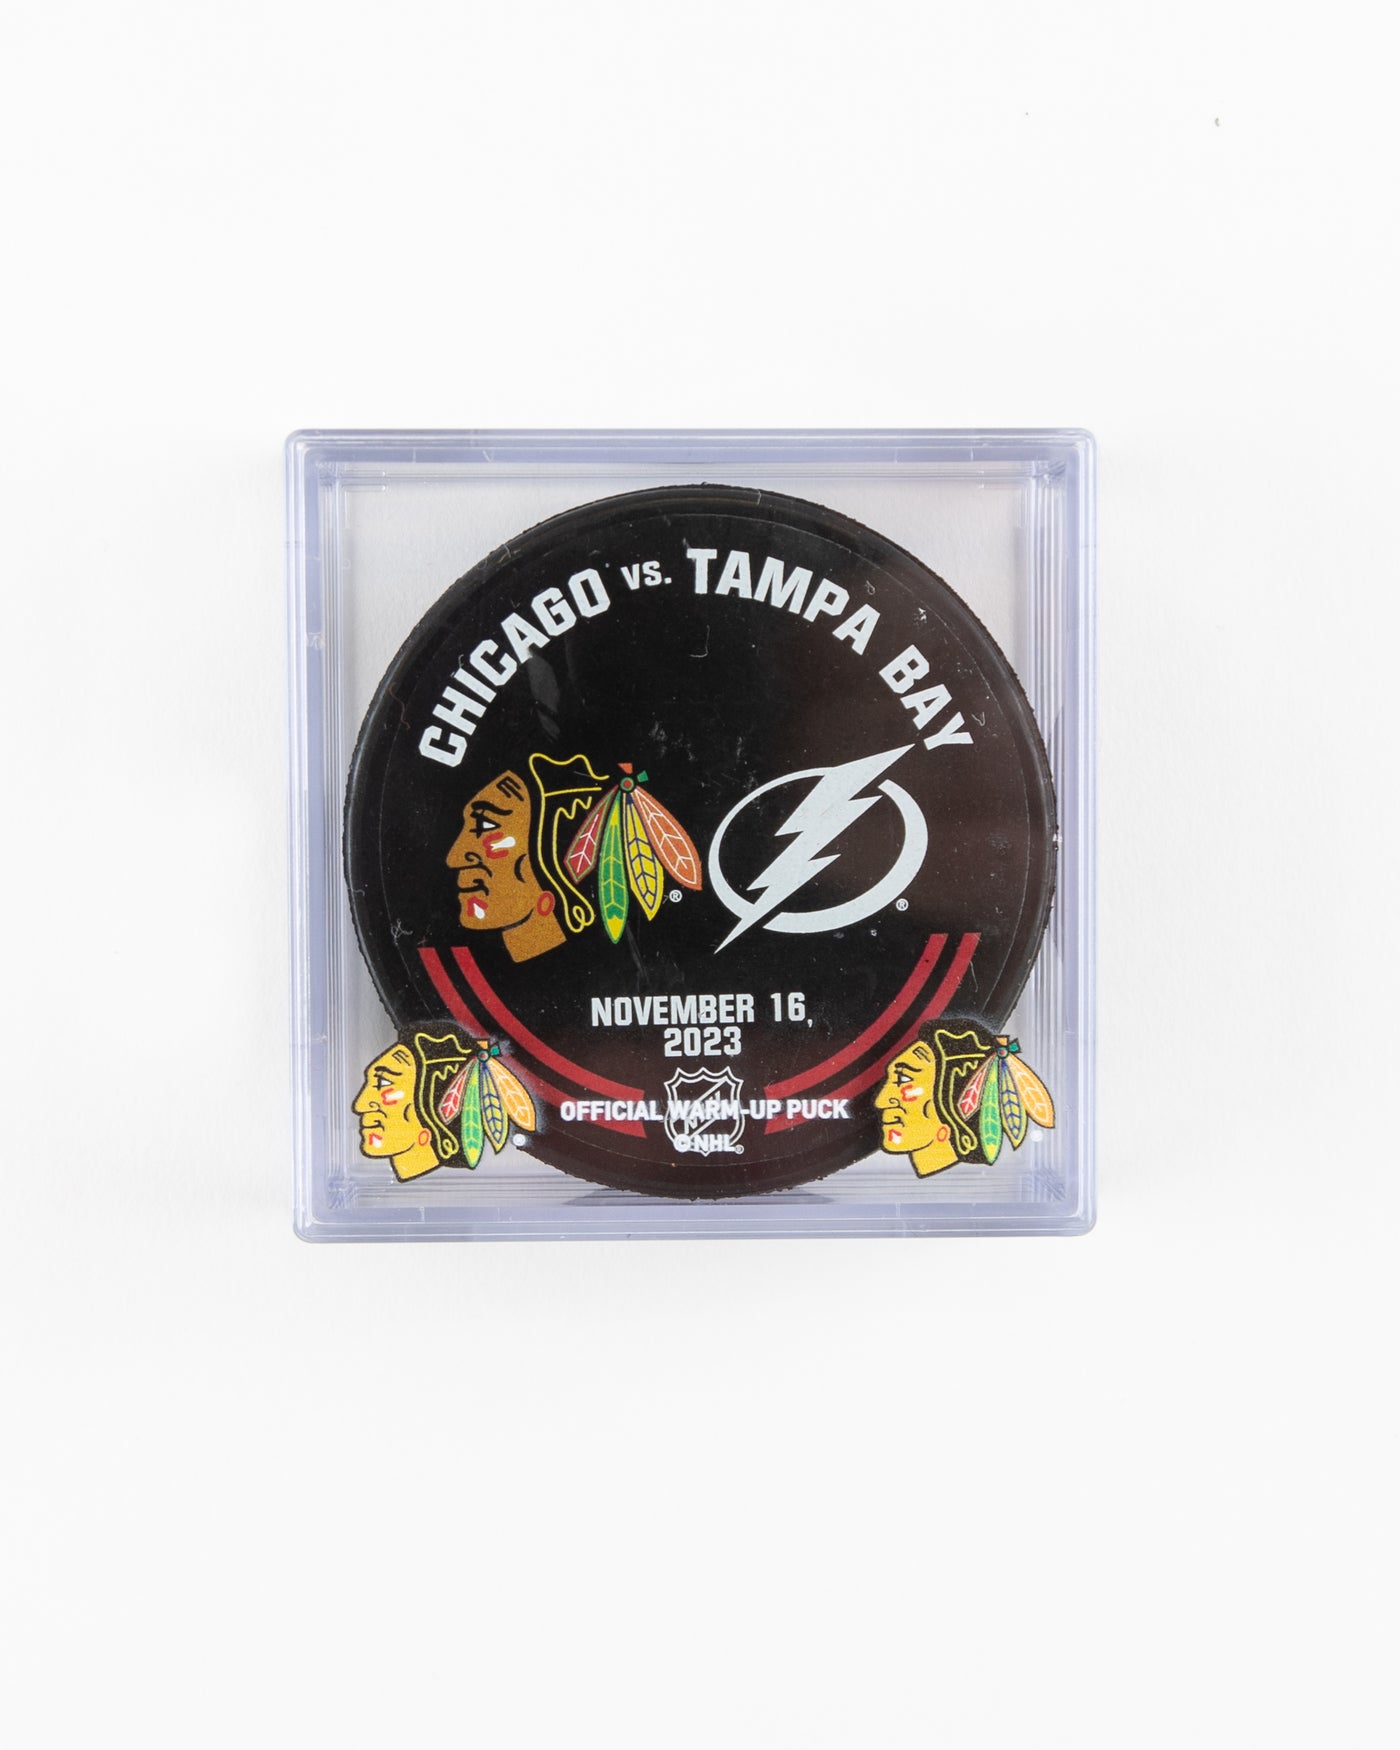 official warm up puck from Chicago Blackhawks vs Tampa Bay Lightning game on November 16, 2023 - front lay flat